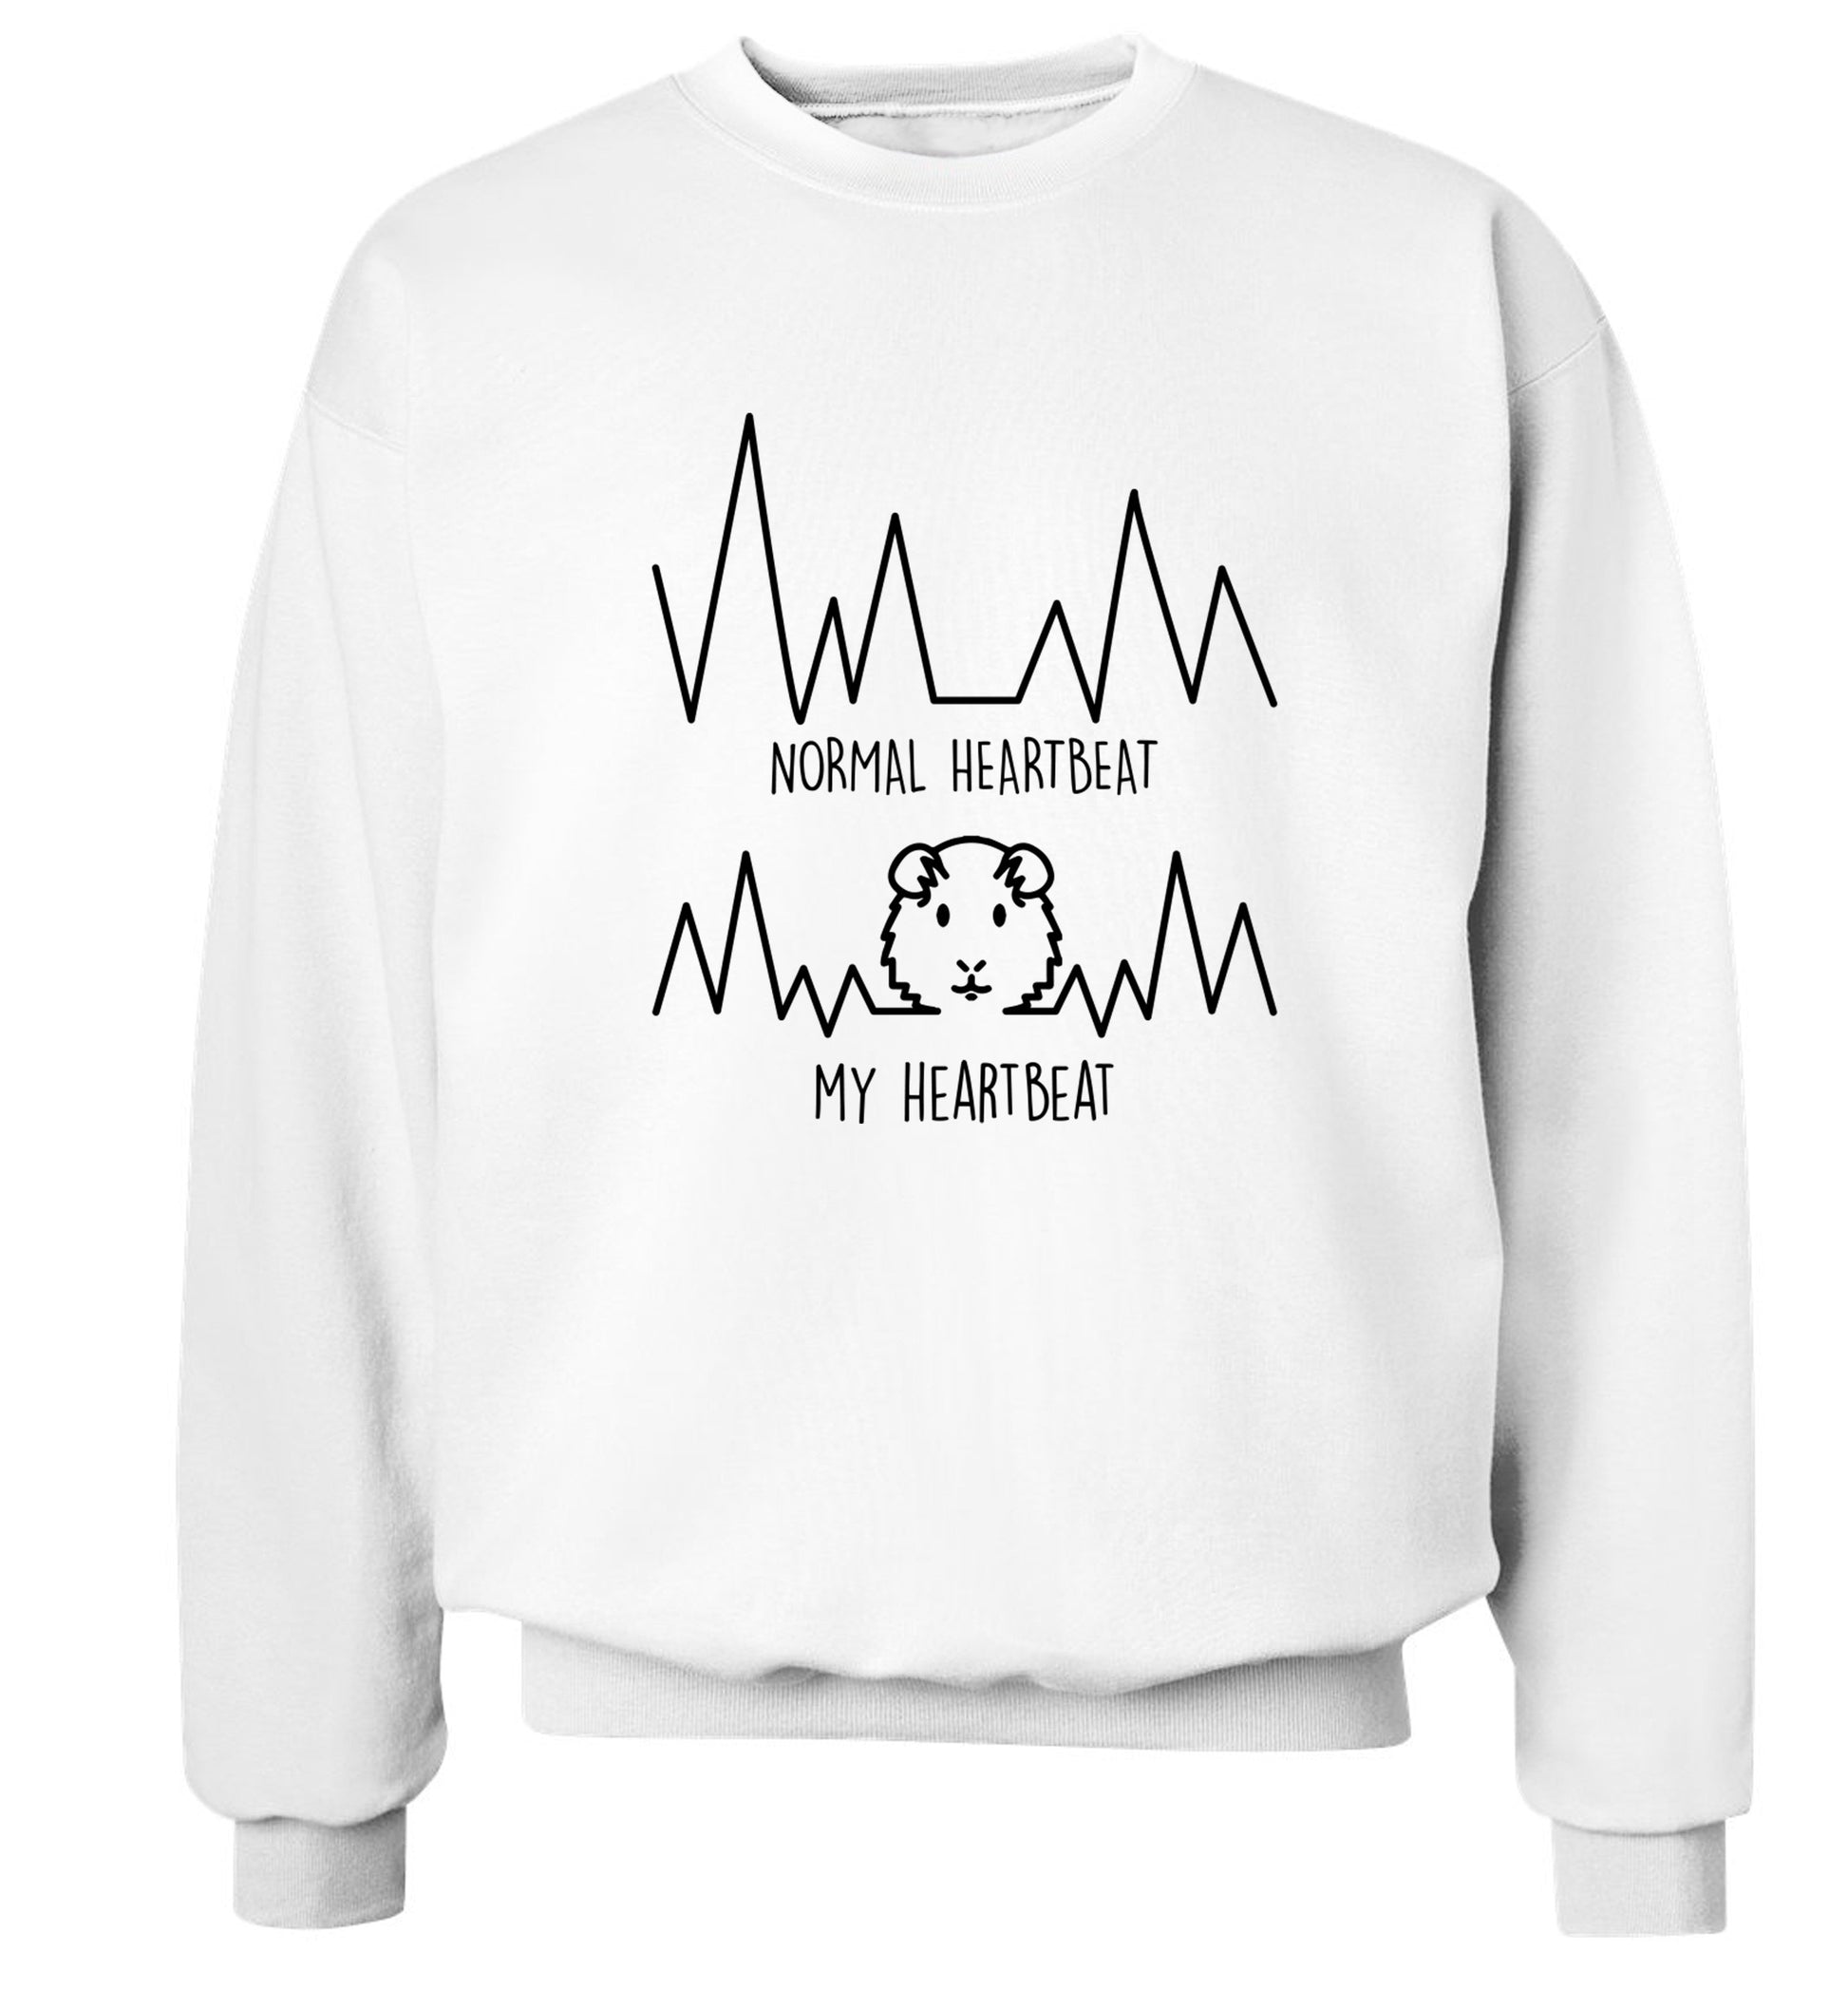 Normal heartbeat vs my heartbeat guinea pig lover Adult's unisex white  sweater 2XL